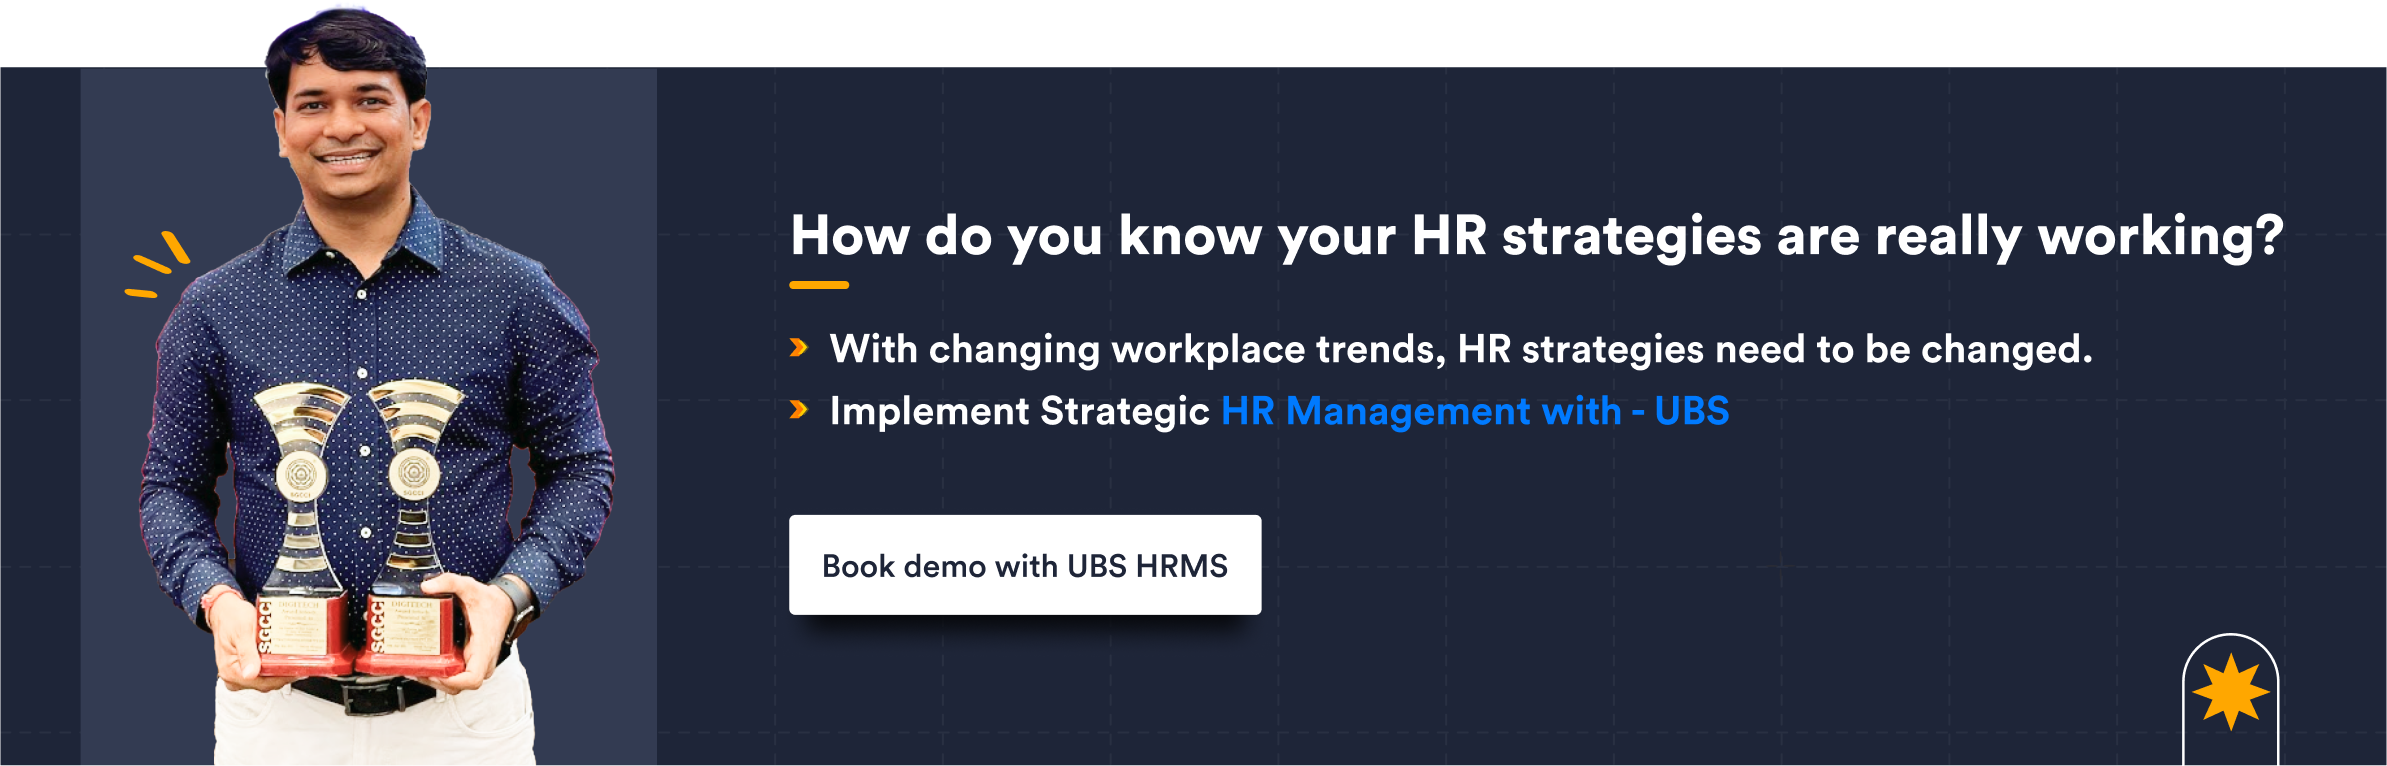 How do you know your HR strategies are really working